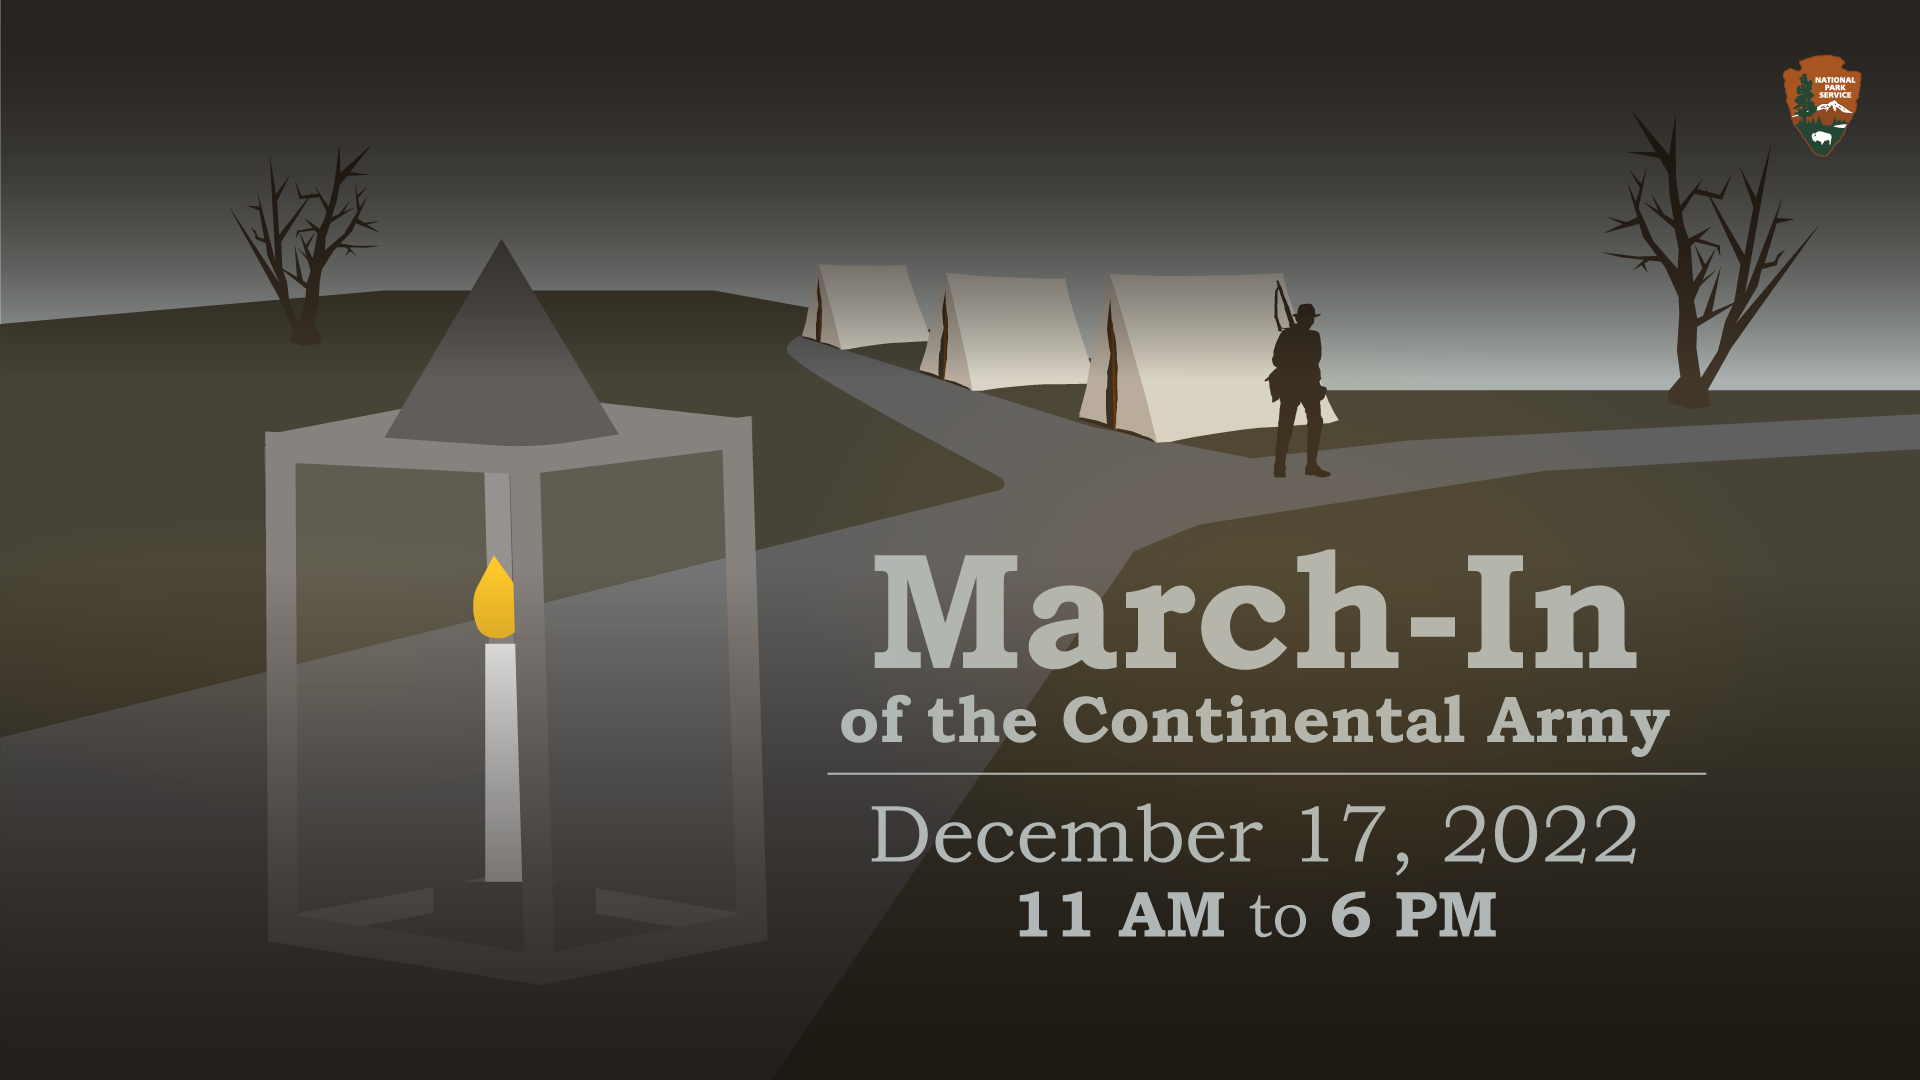 illustrated graphic of lantern sitting on a path with three tents, a soldier, and text that reads March In of the Continental Army December 17, 2022, 11 AM to 6 PM